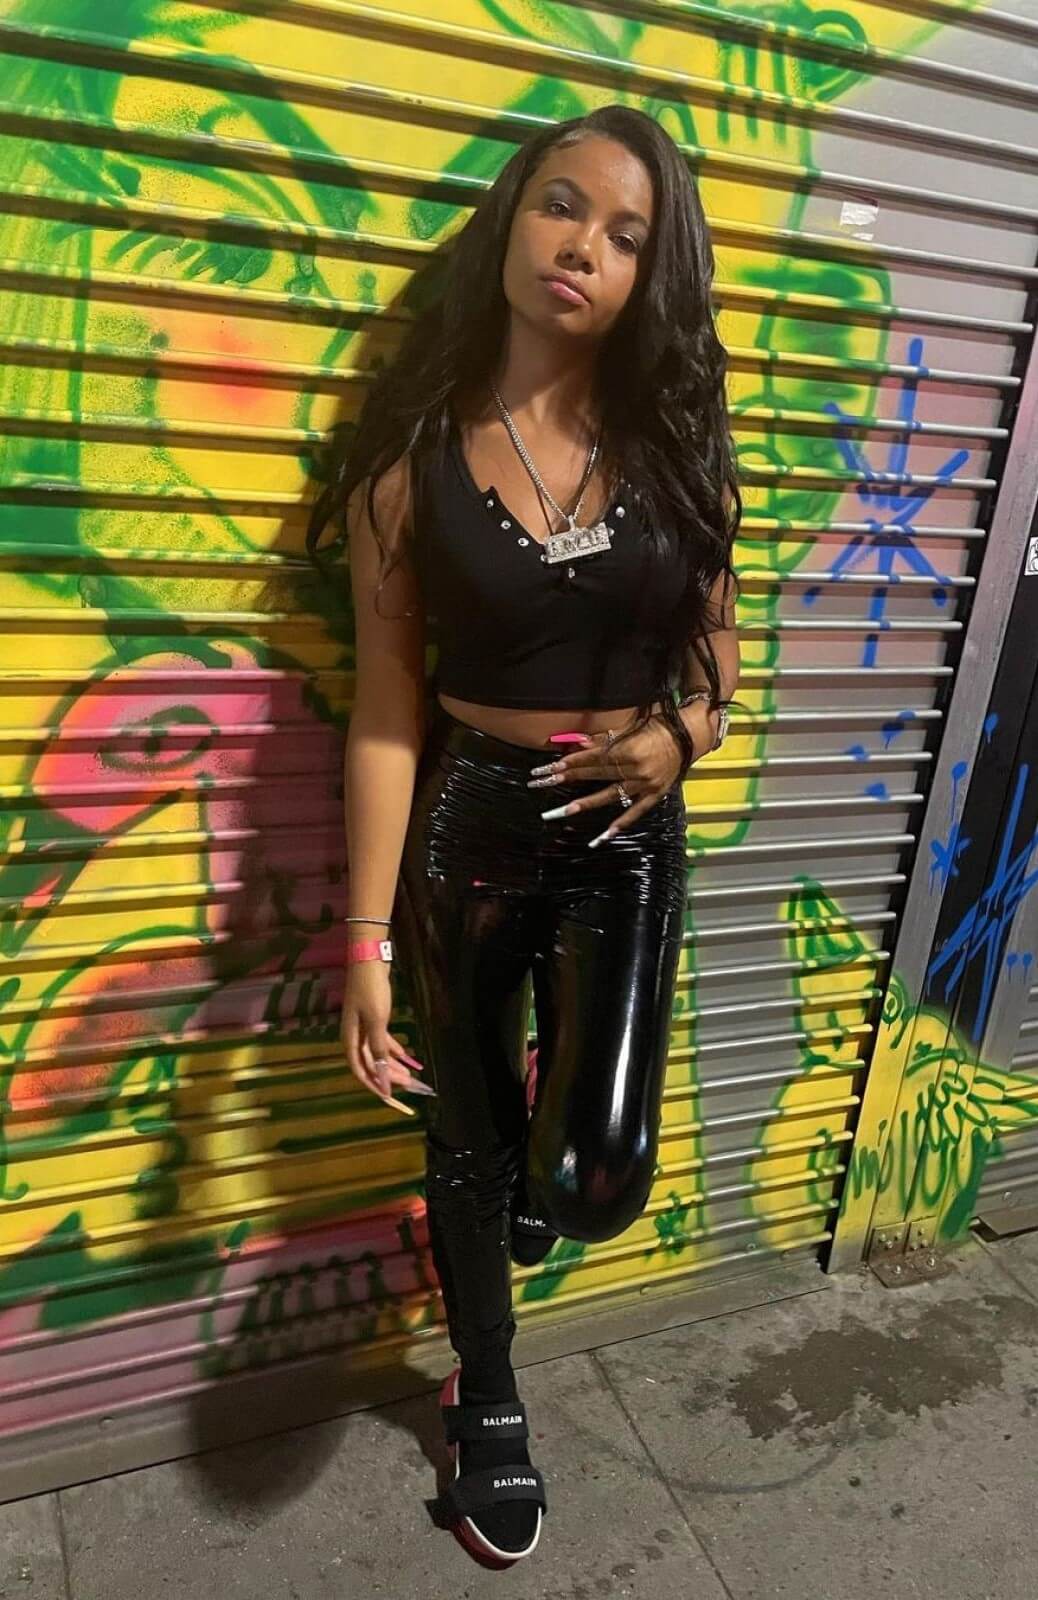 Brooklyn Queen In Black Crop Top With Shiny Leather Pants